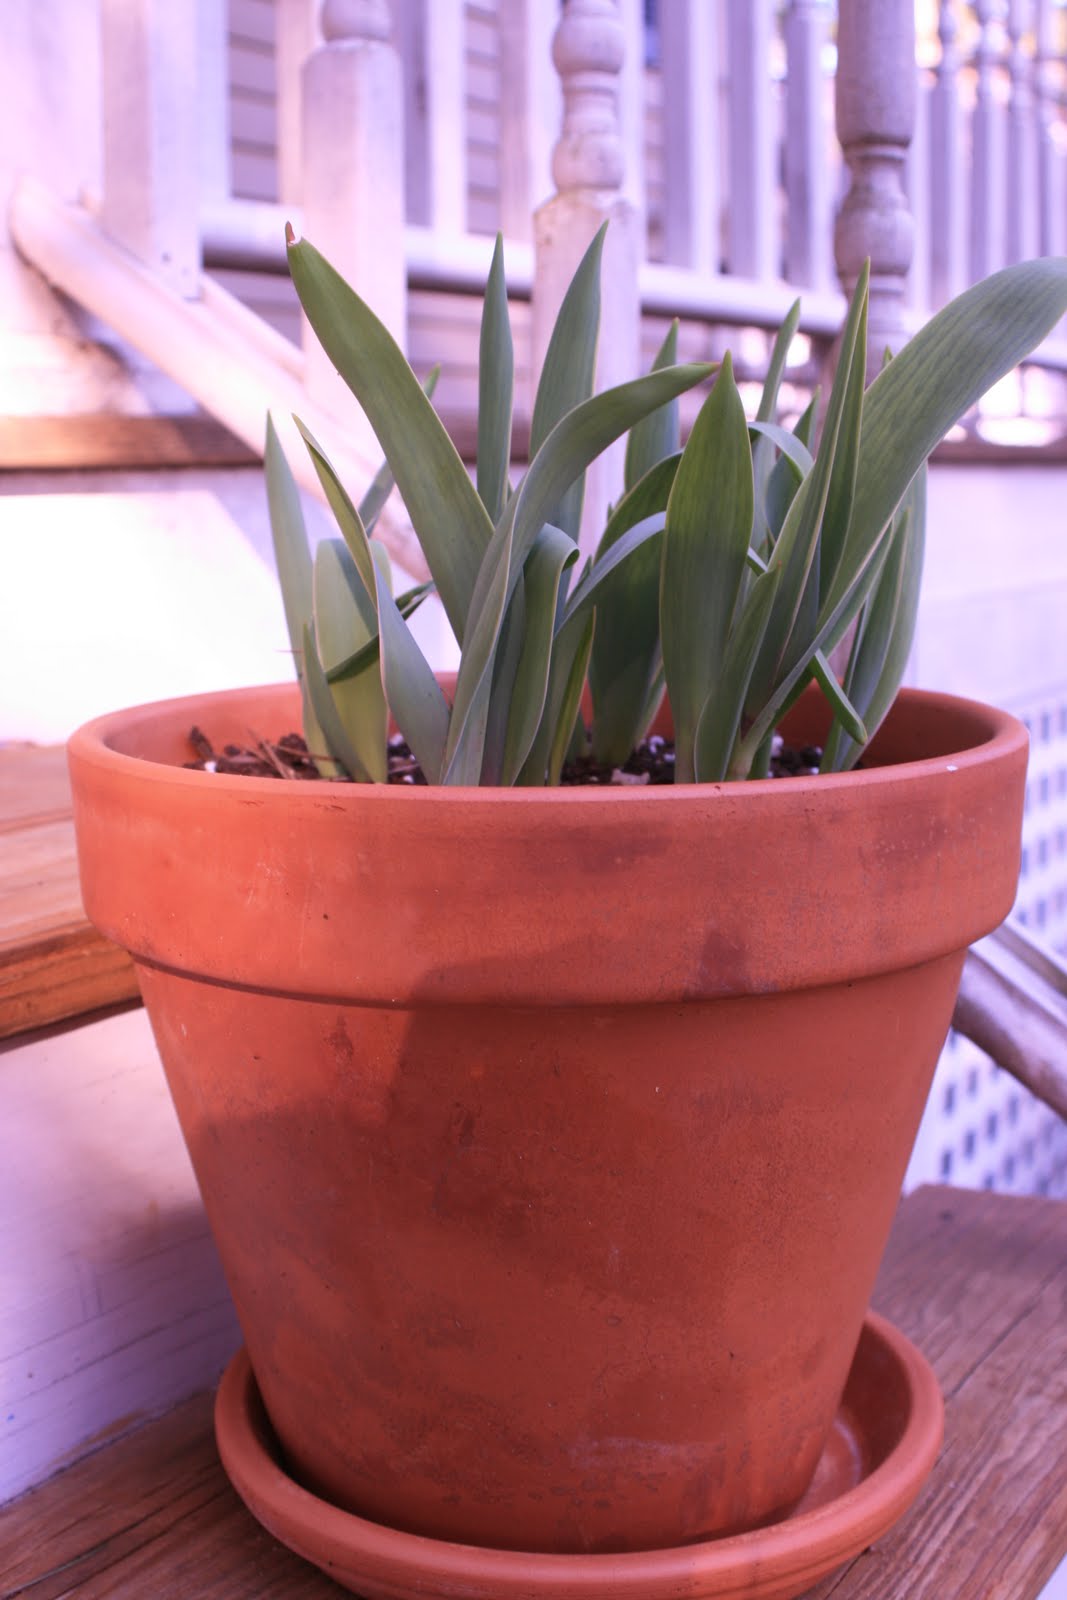 Sign of Spring #2...nearly budding tulips that my ever so thoughtful ...